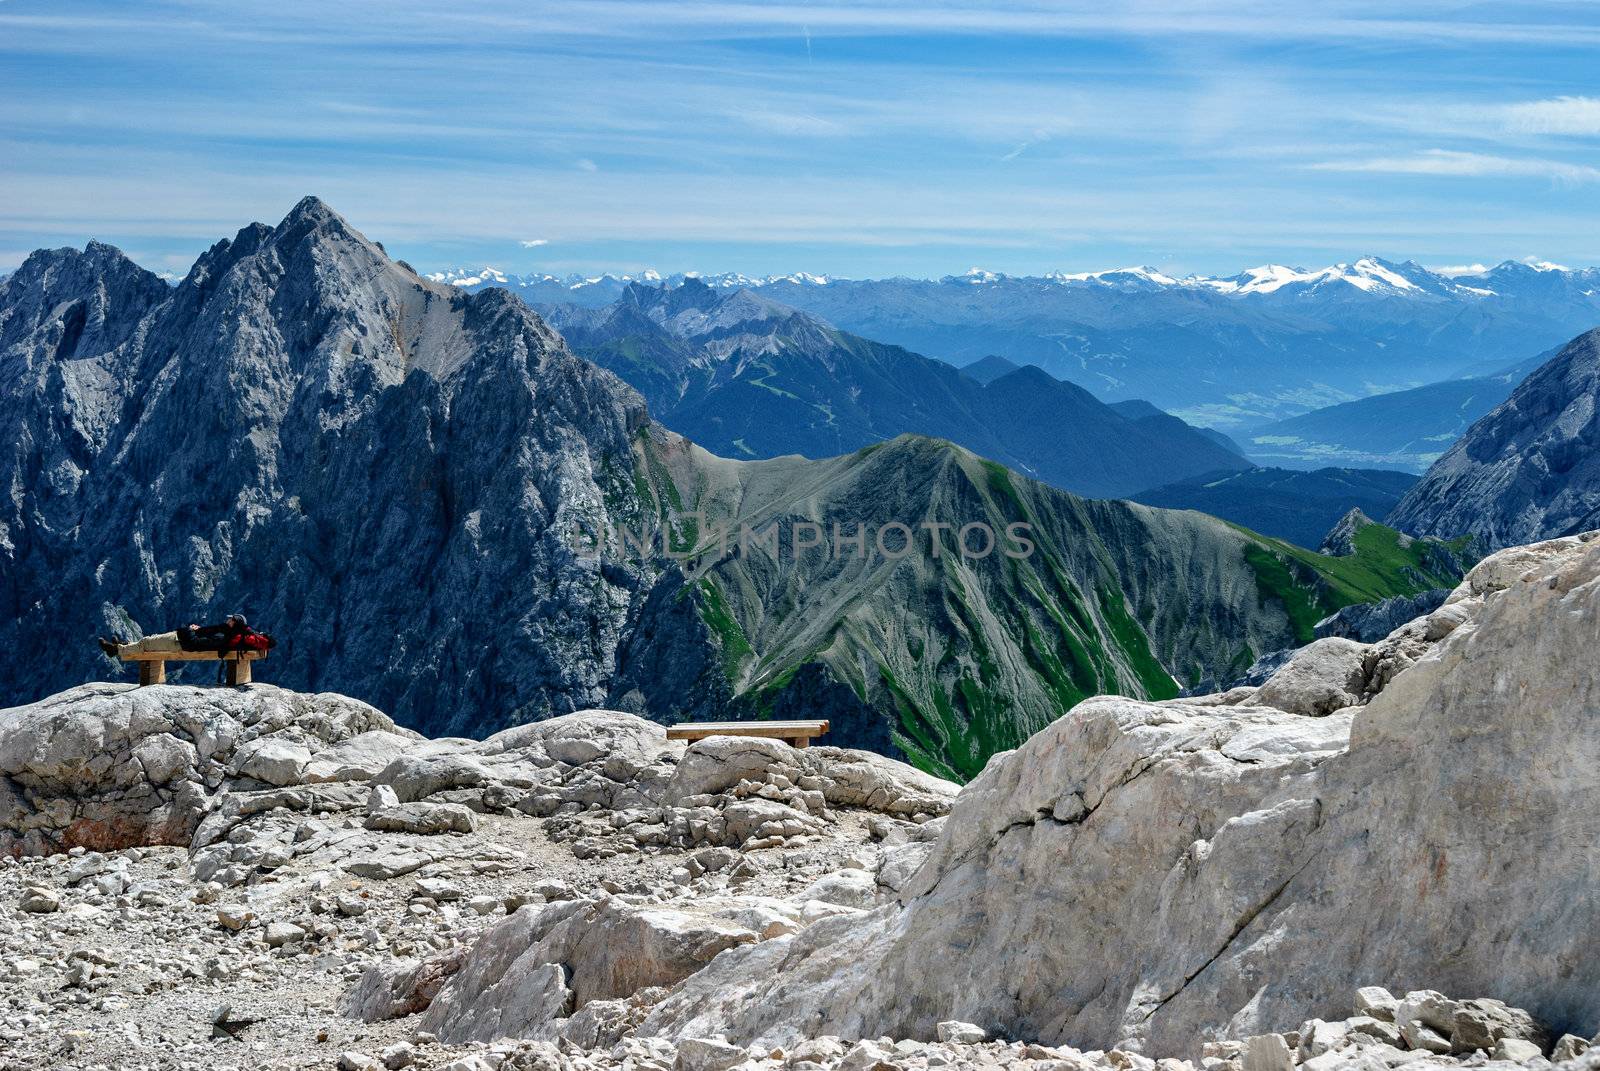 A man is sleeping on a bench near the top of Zugspitze, the highest mountain in Germany.